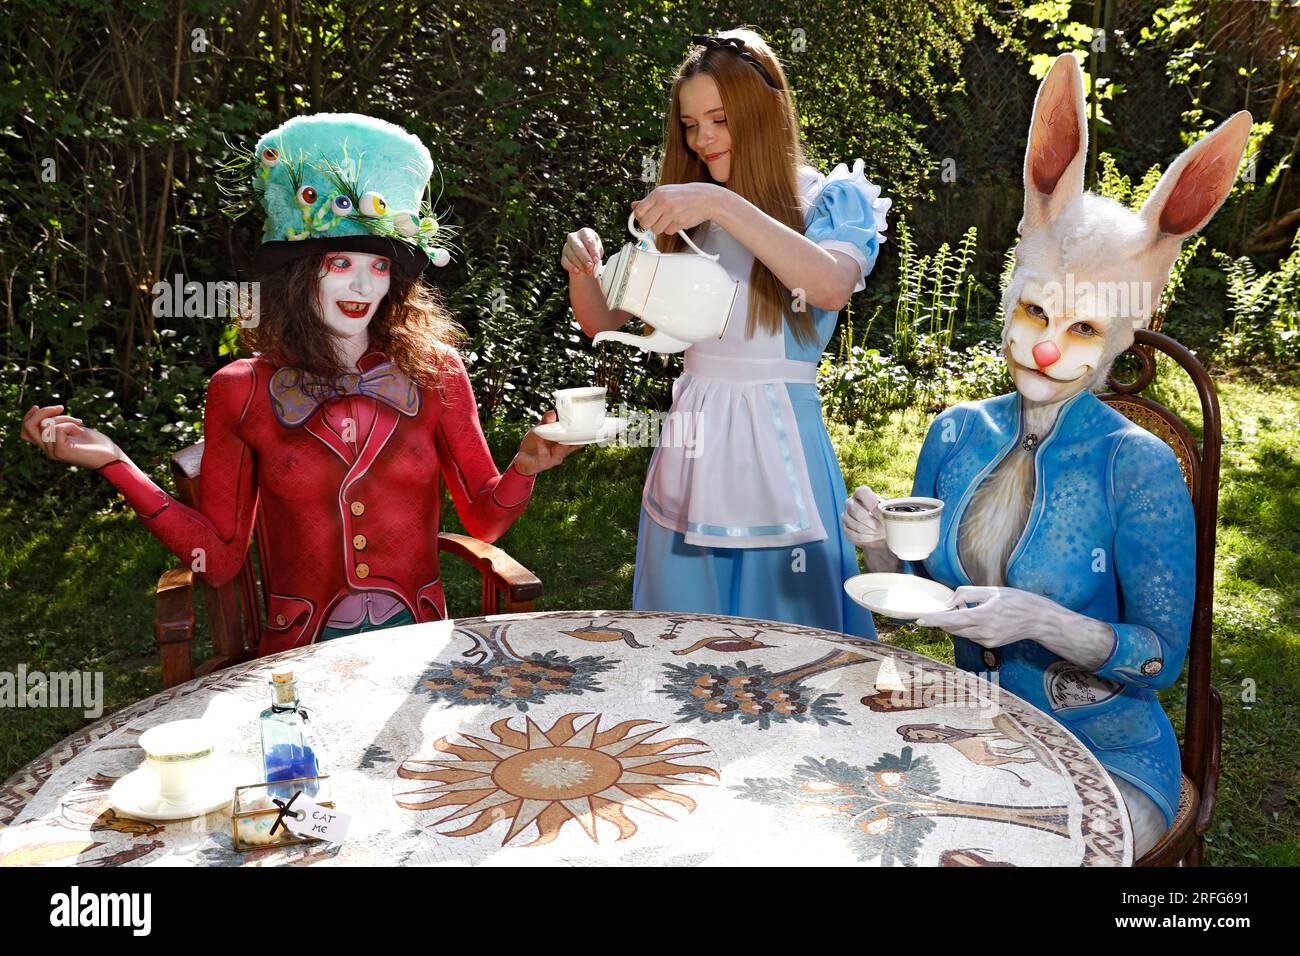 GEEK ART - Bodypainting and Transformaking: Alice in Wonderland photoshooting with Melina as Alice, Julia as the Mad Hatter and Janina as the White Rabbit in the Czarnecki Garden in Hamelin. - A project by photographer Tschiponnique Skupin and bodypainter Enrico Lein Stock Photo